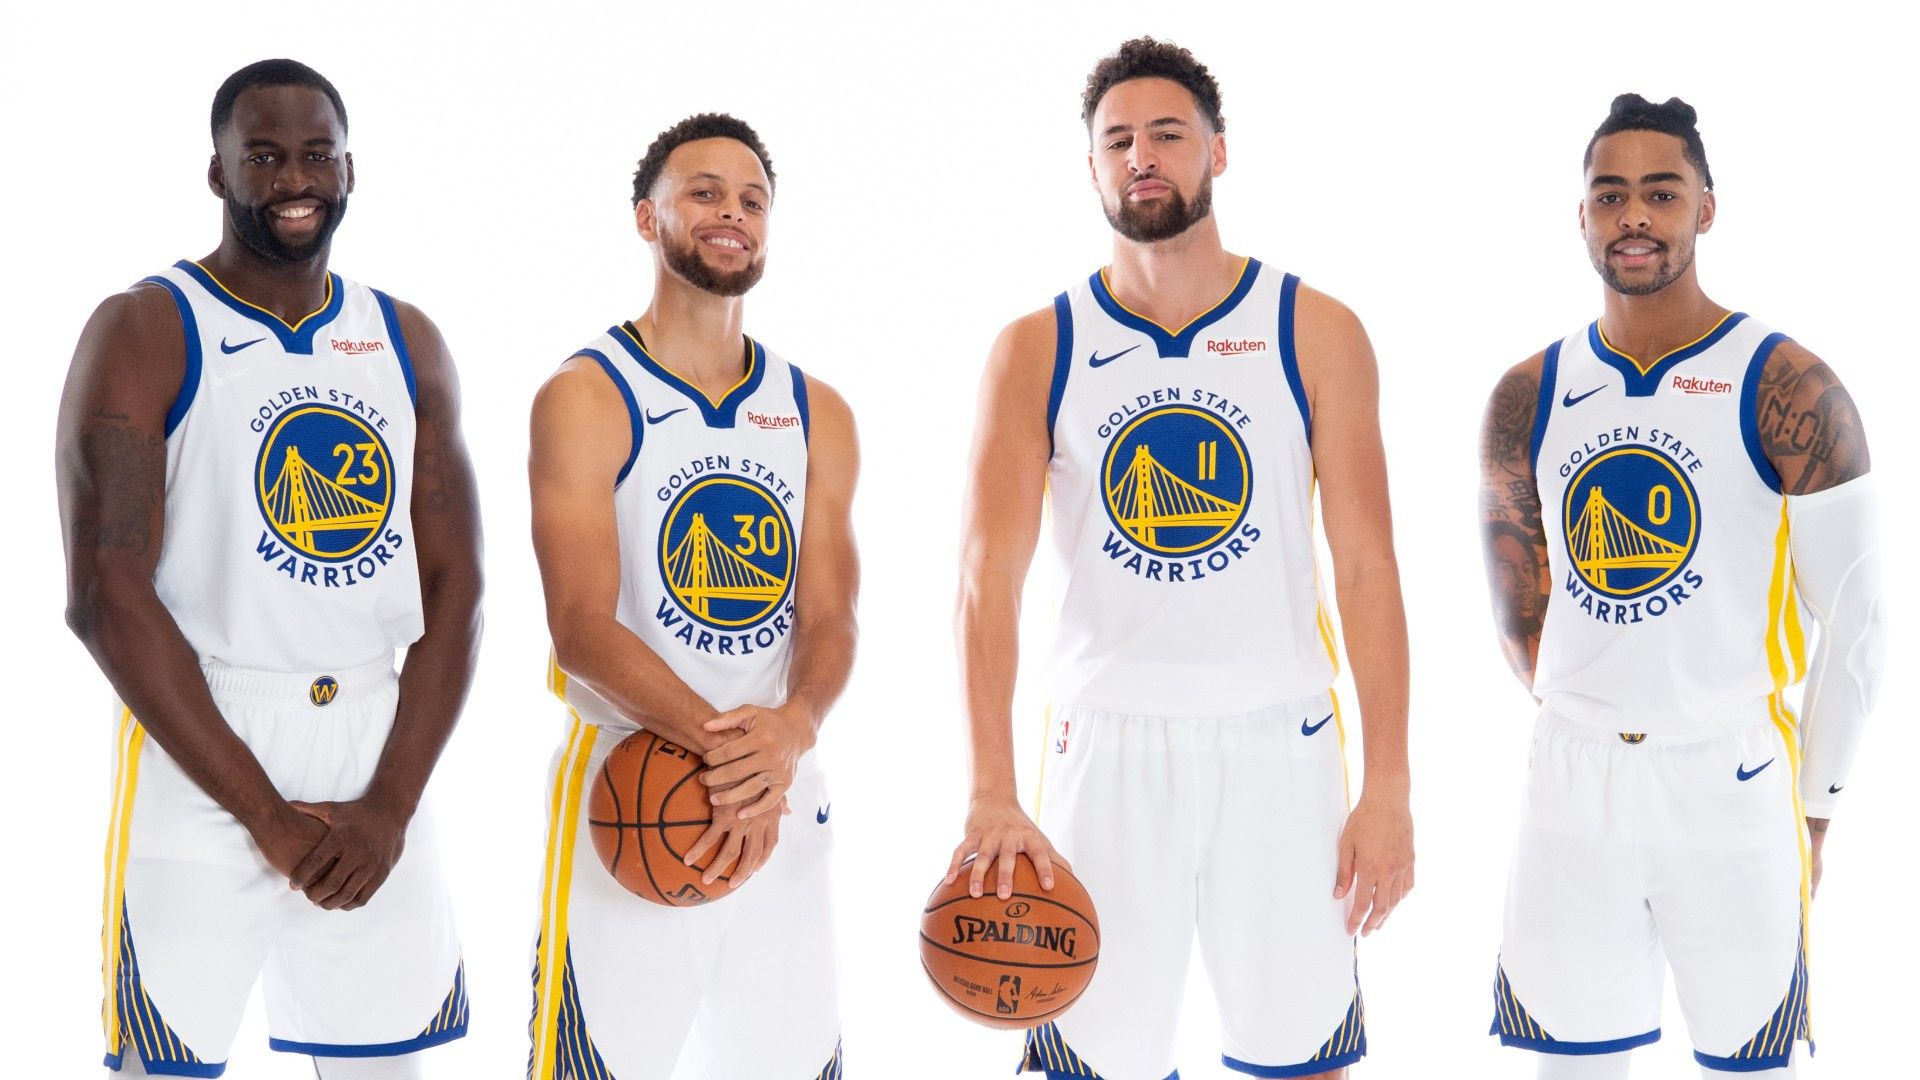 New Season, New Look: Meet the Warriors' Revamped Roster